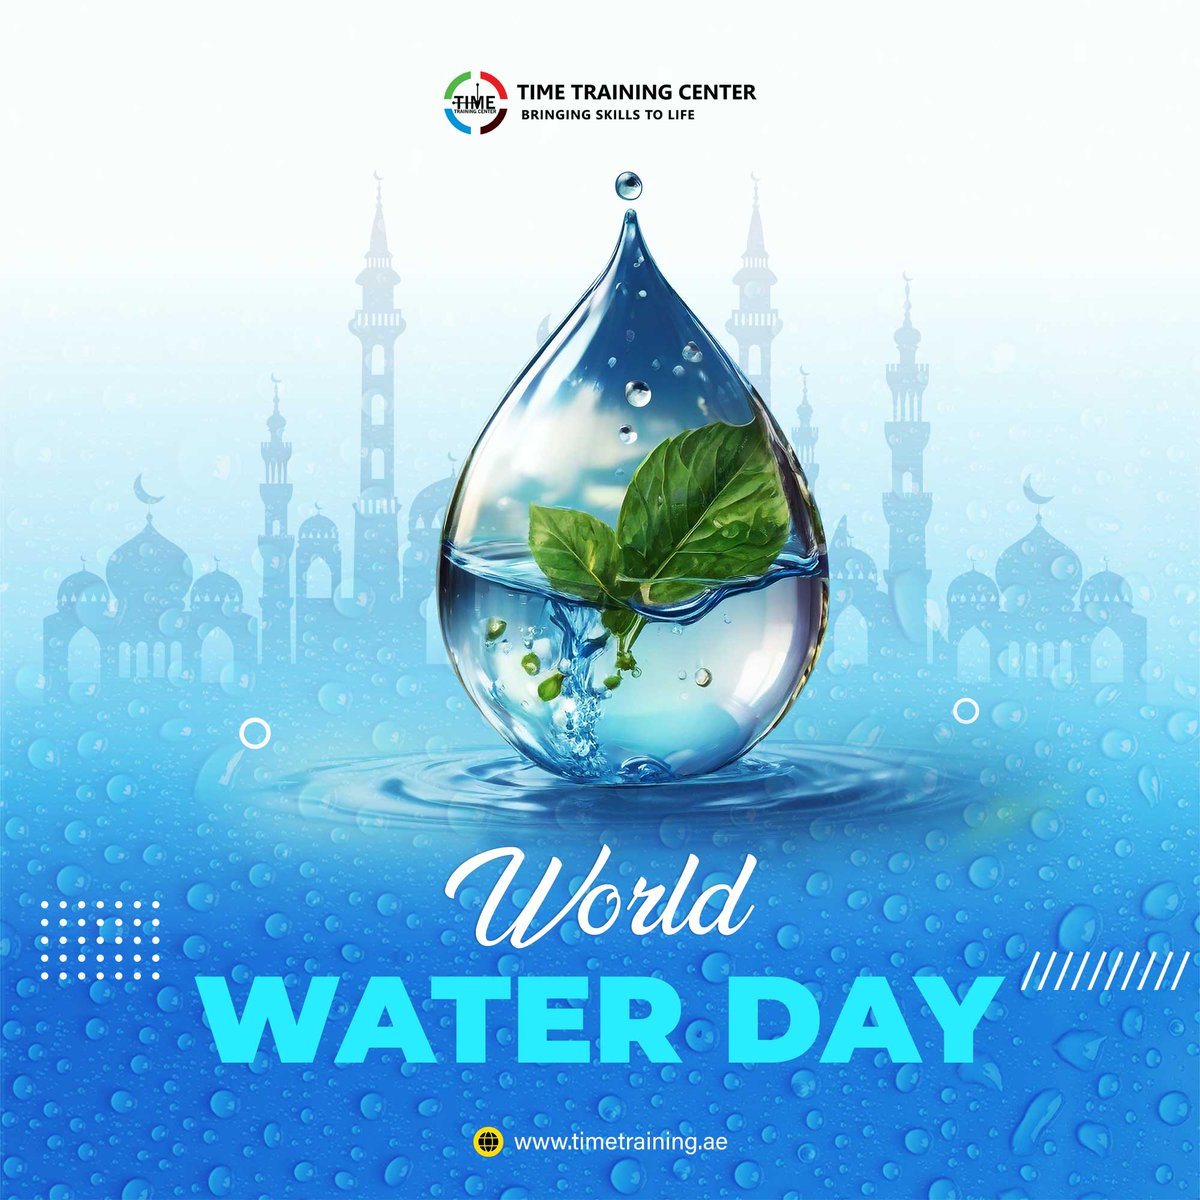 Water is the Driving Force in Nature. On this World Water Day, let's take the initiative to educate, celebrate, reflect, and make a difference in water management practices in the world. World Water Day Wishes from Time Training Center. #worldwaterday2024 #AbuDhabi